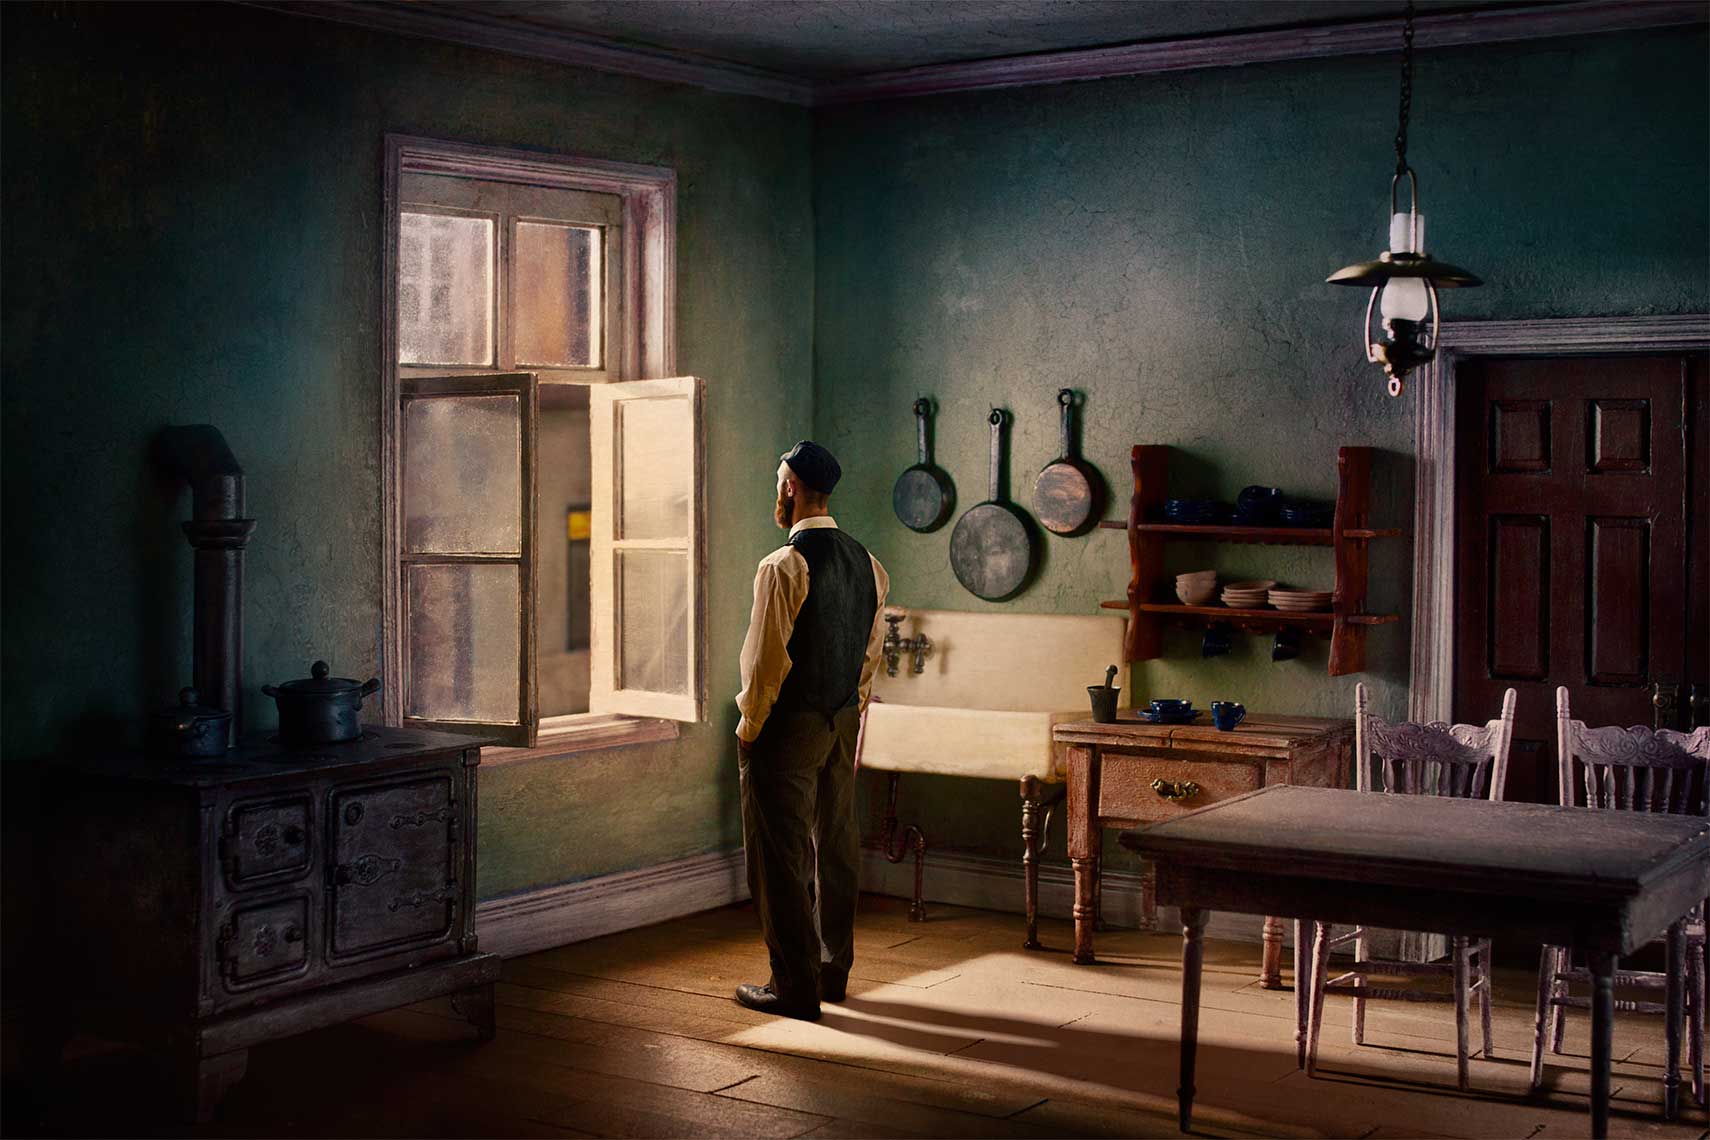 Painterly photomontage of 1930s Eastern European Jewish man standing in Hopper-like light in 1930s’ kitchen gazing out of the opened window.